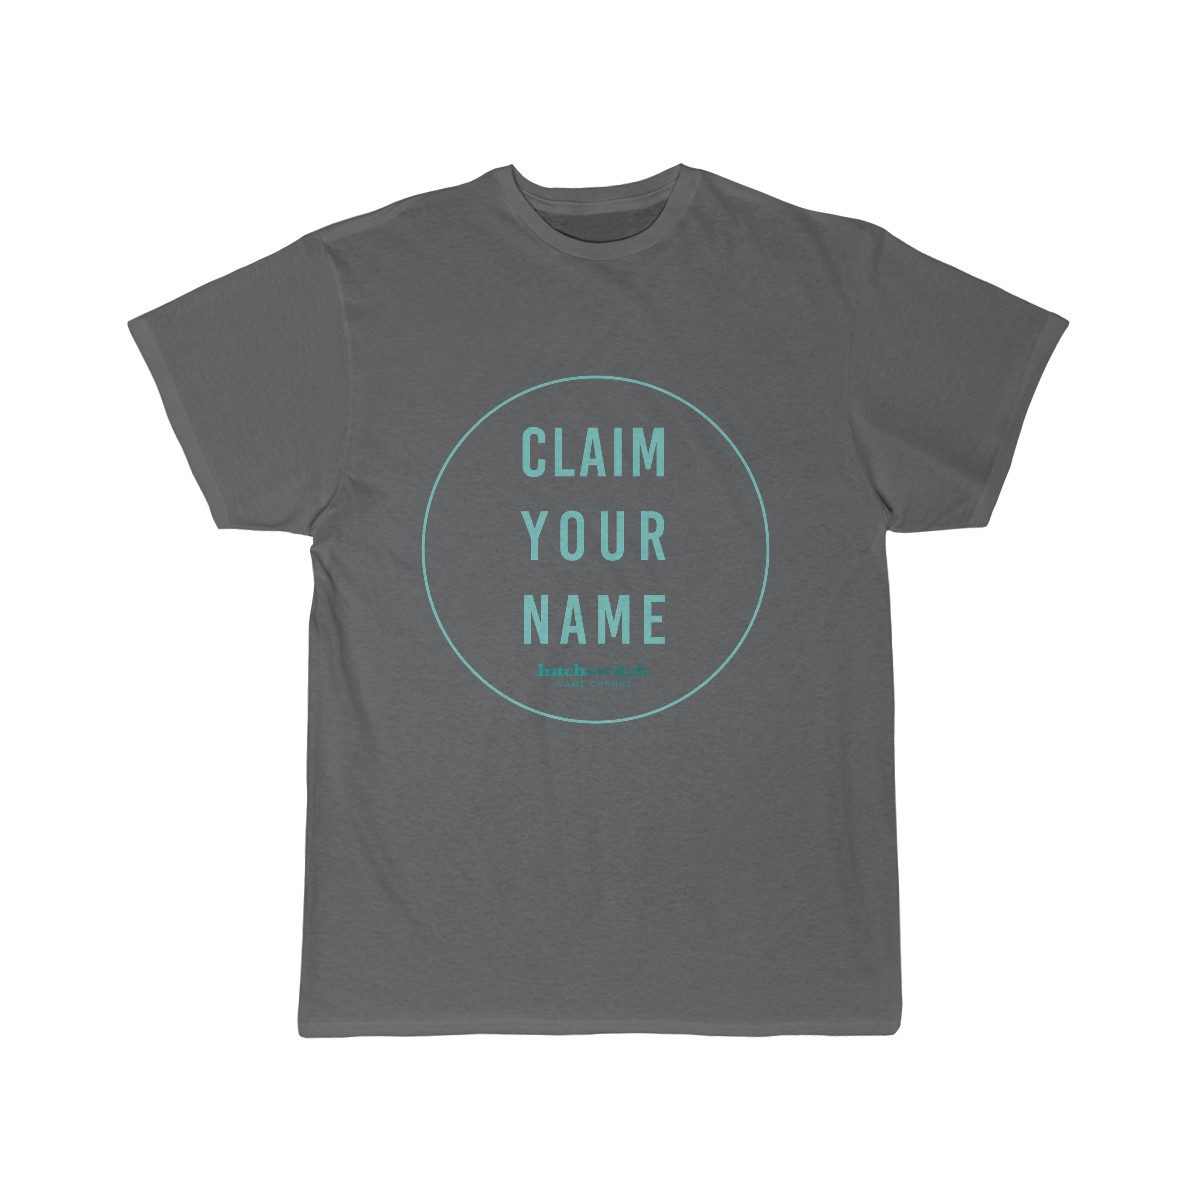 Claim Your Name T-Shirt! 